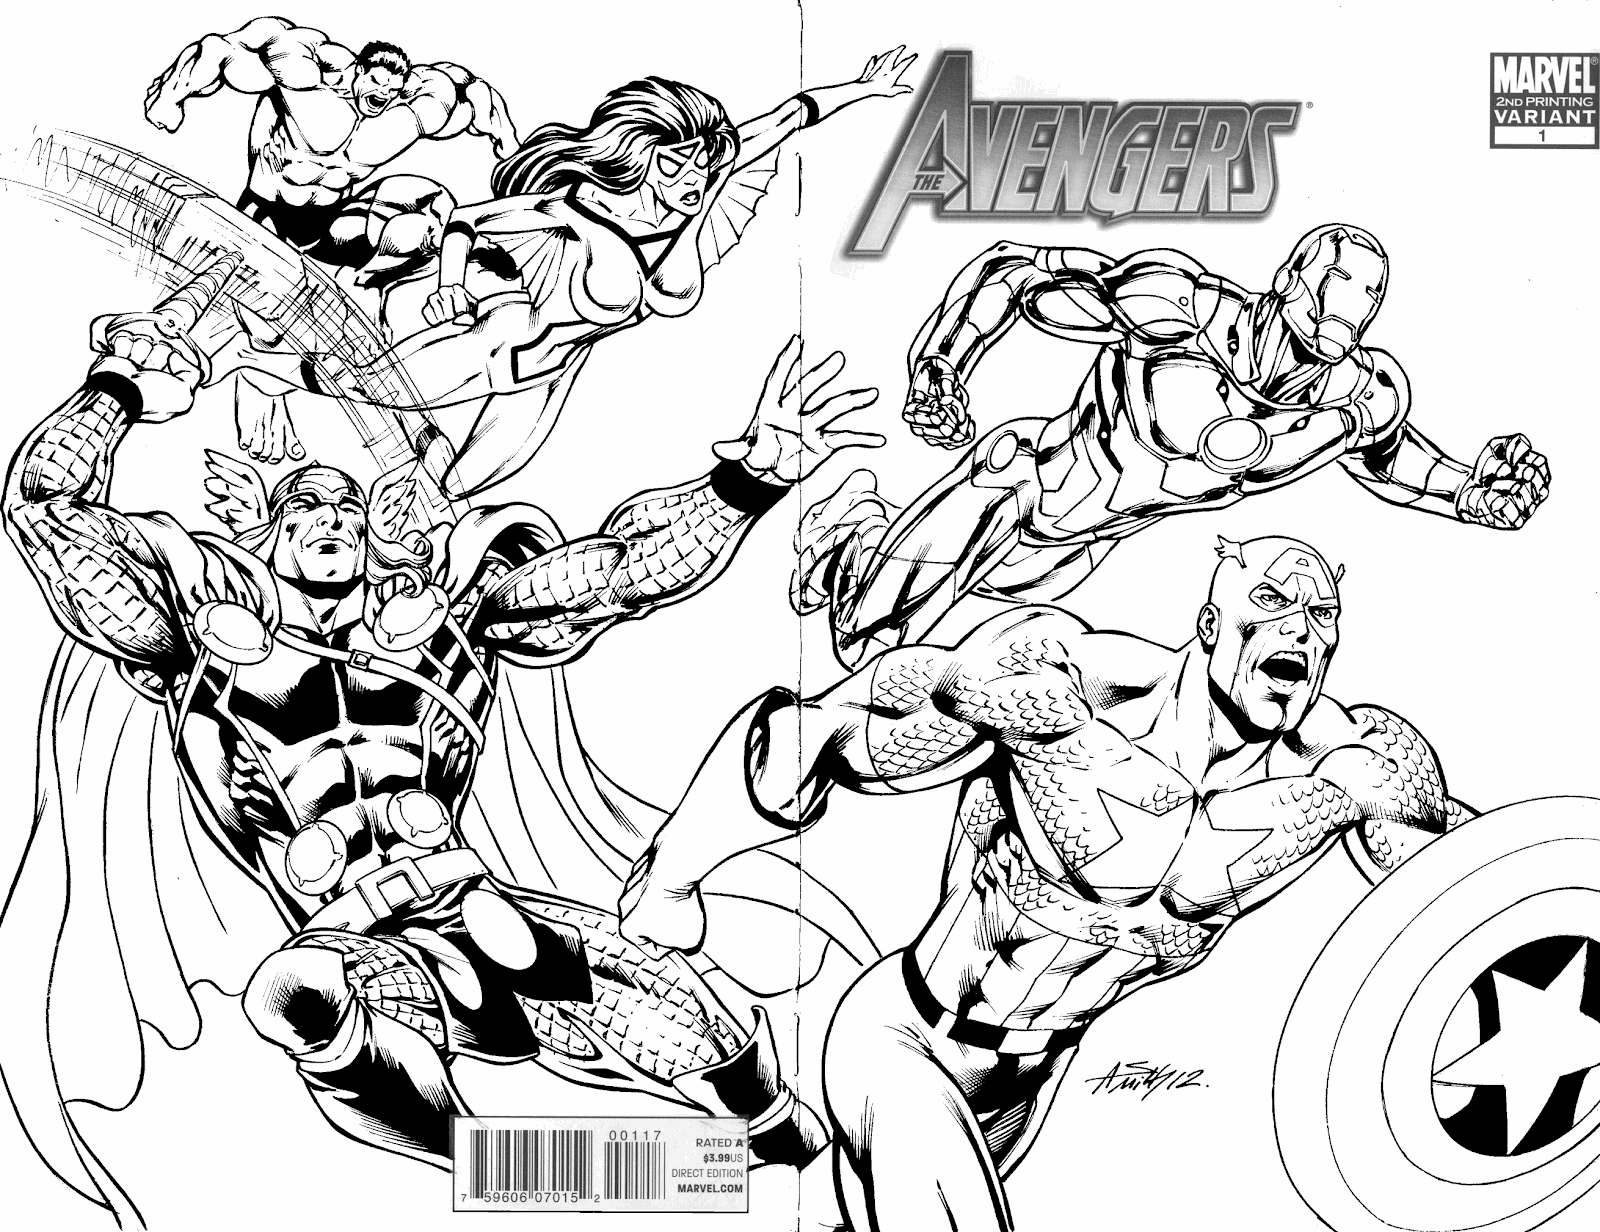 Marvel Superheroes Avengers in Action Coloring Page for ...